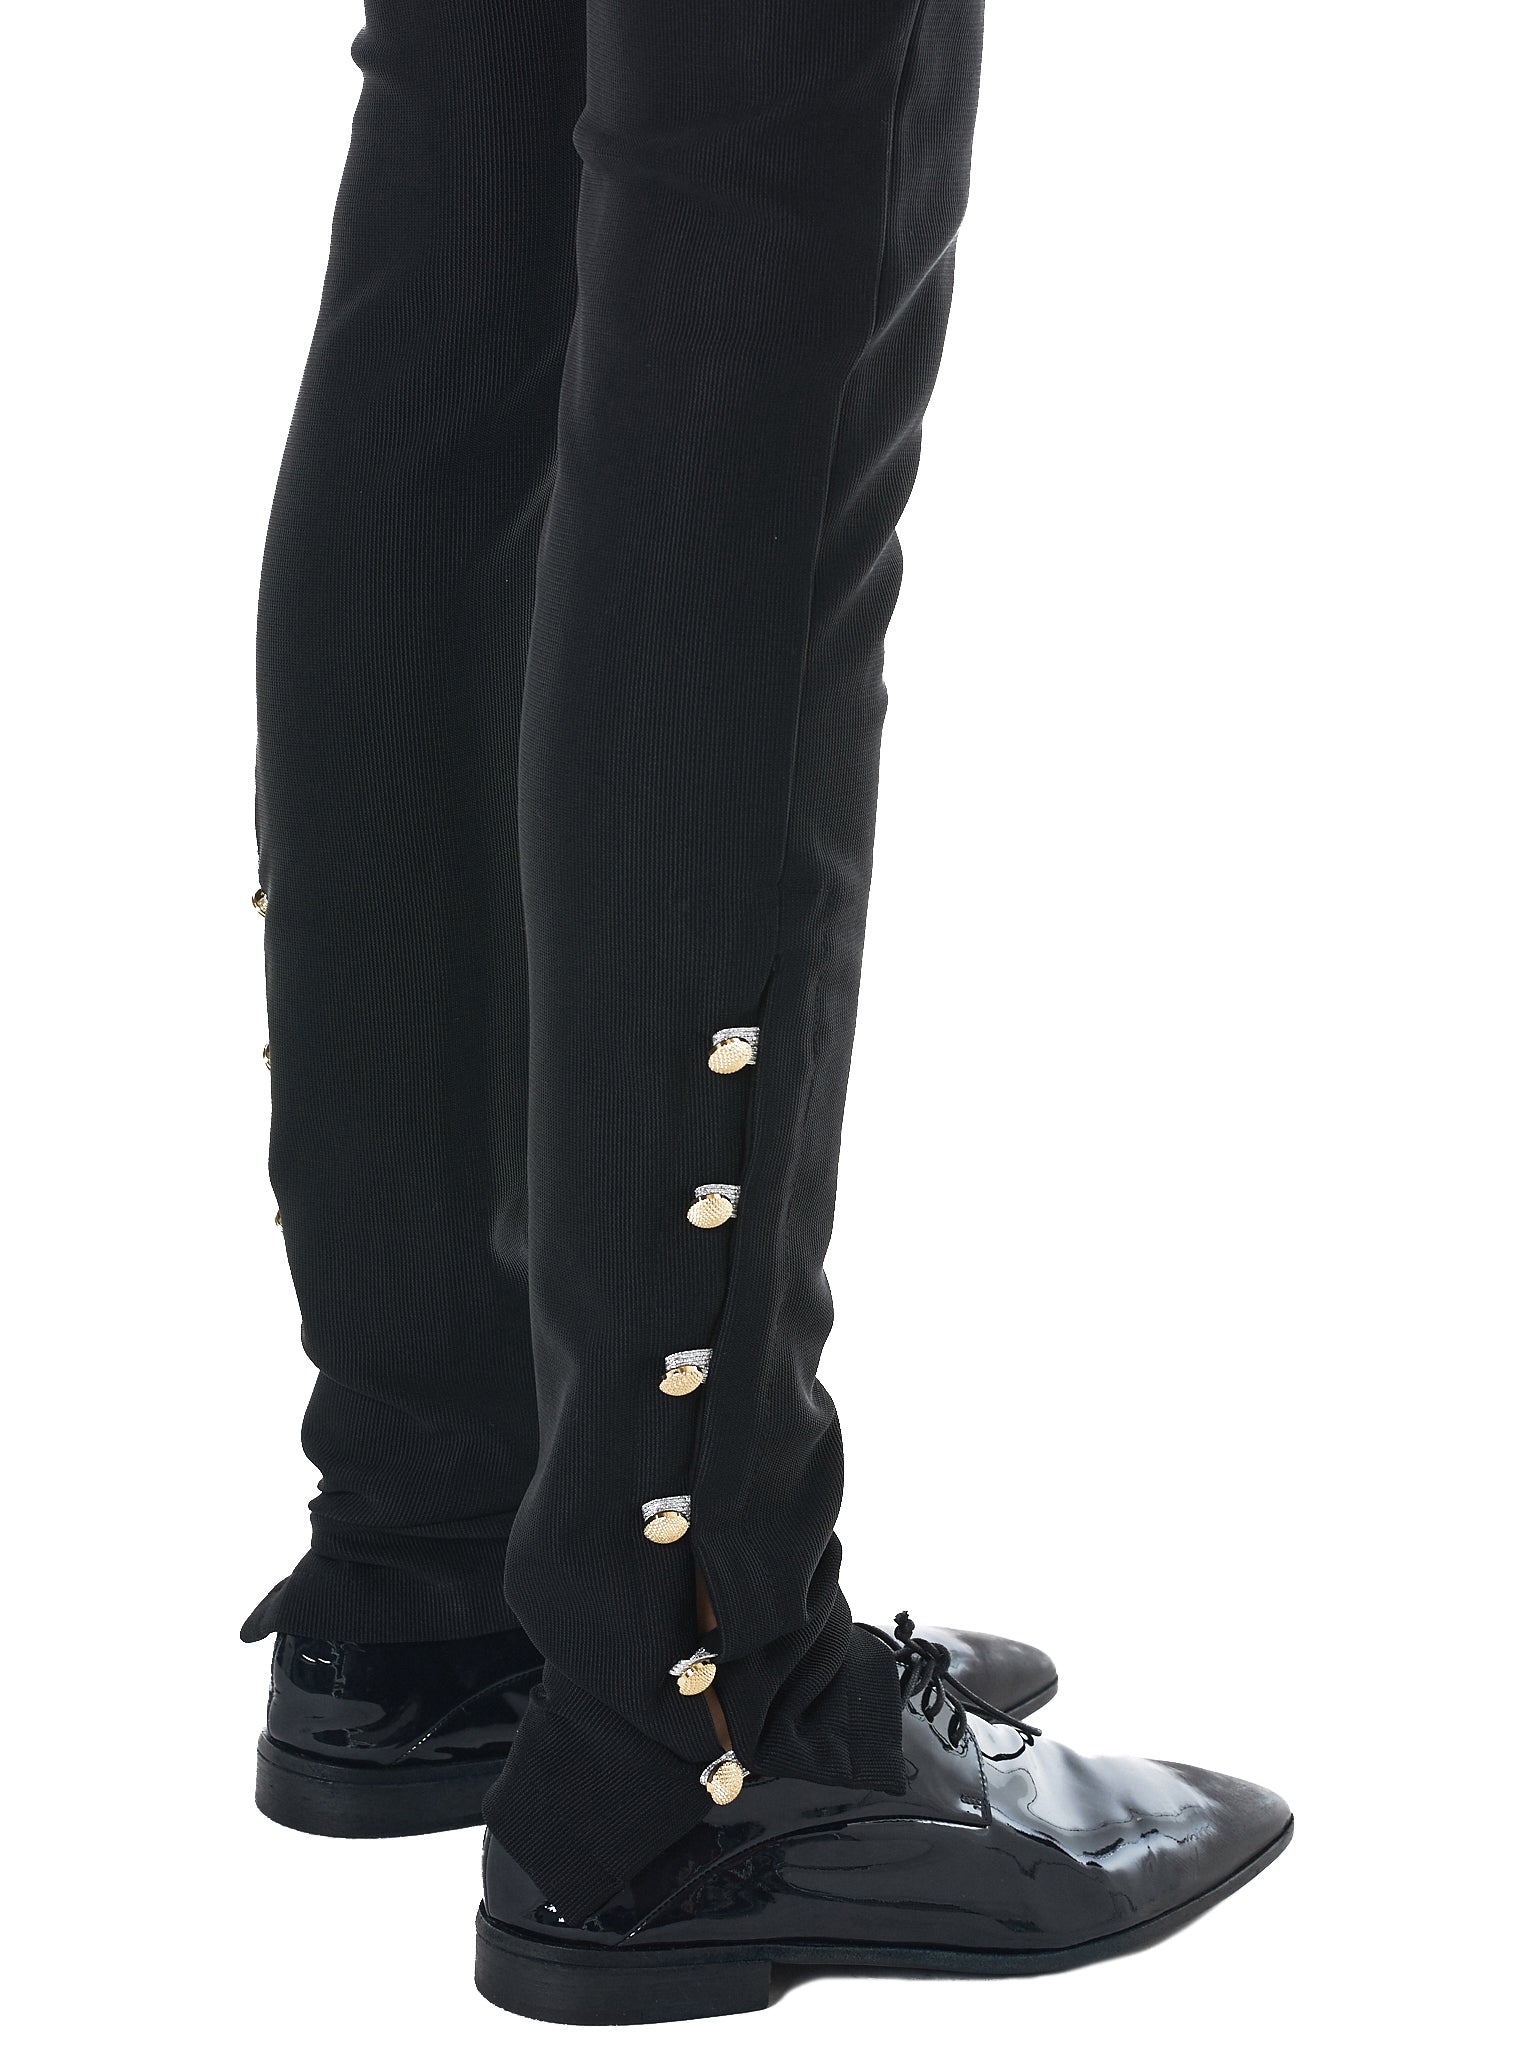 Fitted Stretch Trousers (PA13200-BLACK)